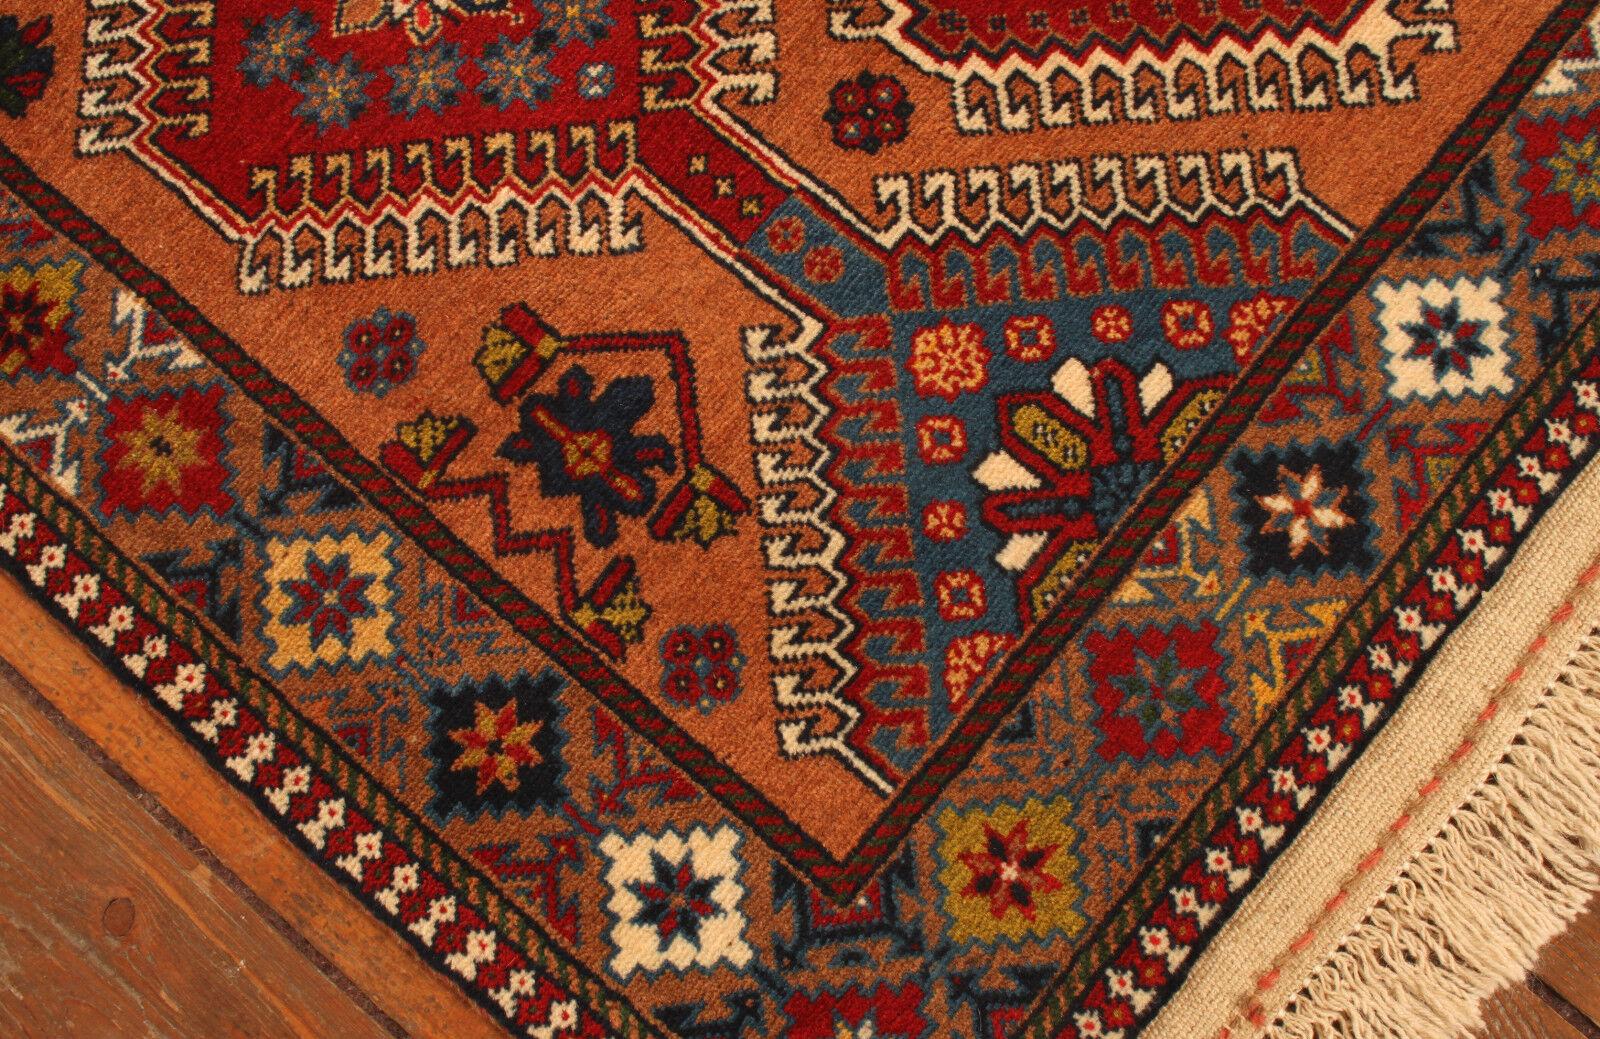 Handmade Vintage Persian Style Yalameh Rug 3.4' x 4.7', 1990s - 1T17 In Good Condition For Sale In Bordeaux, FR